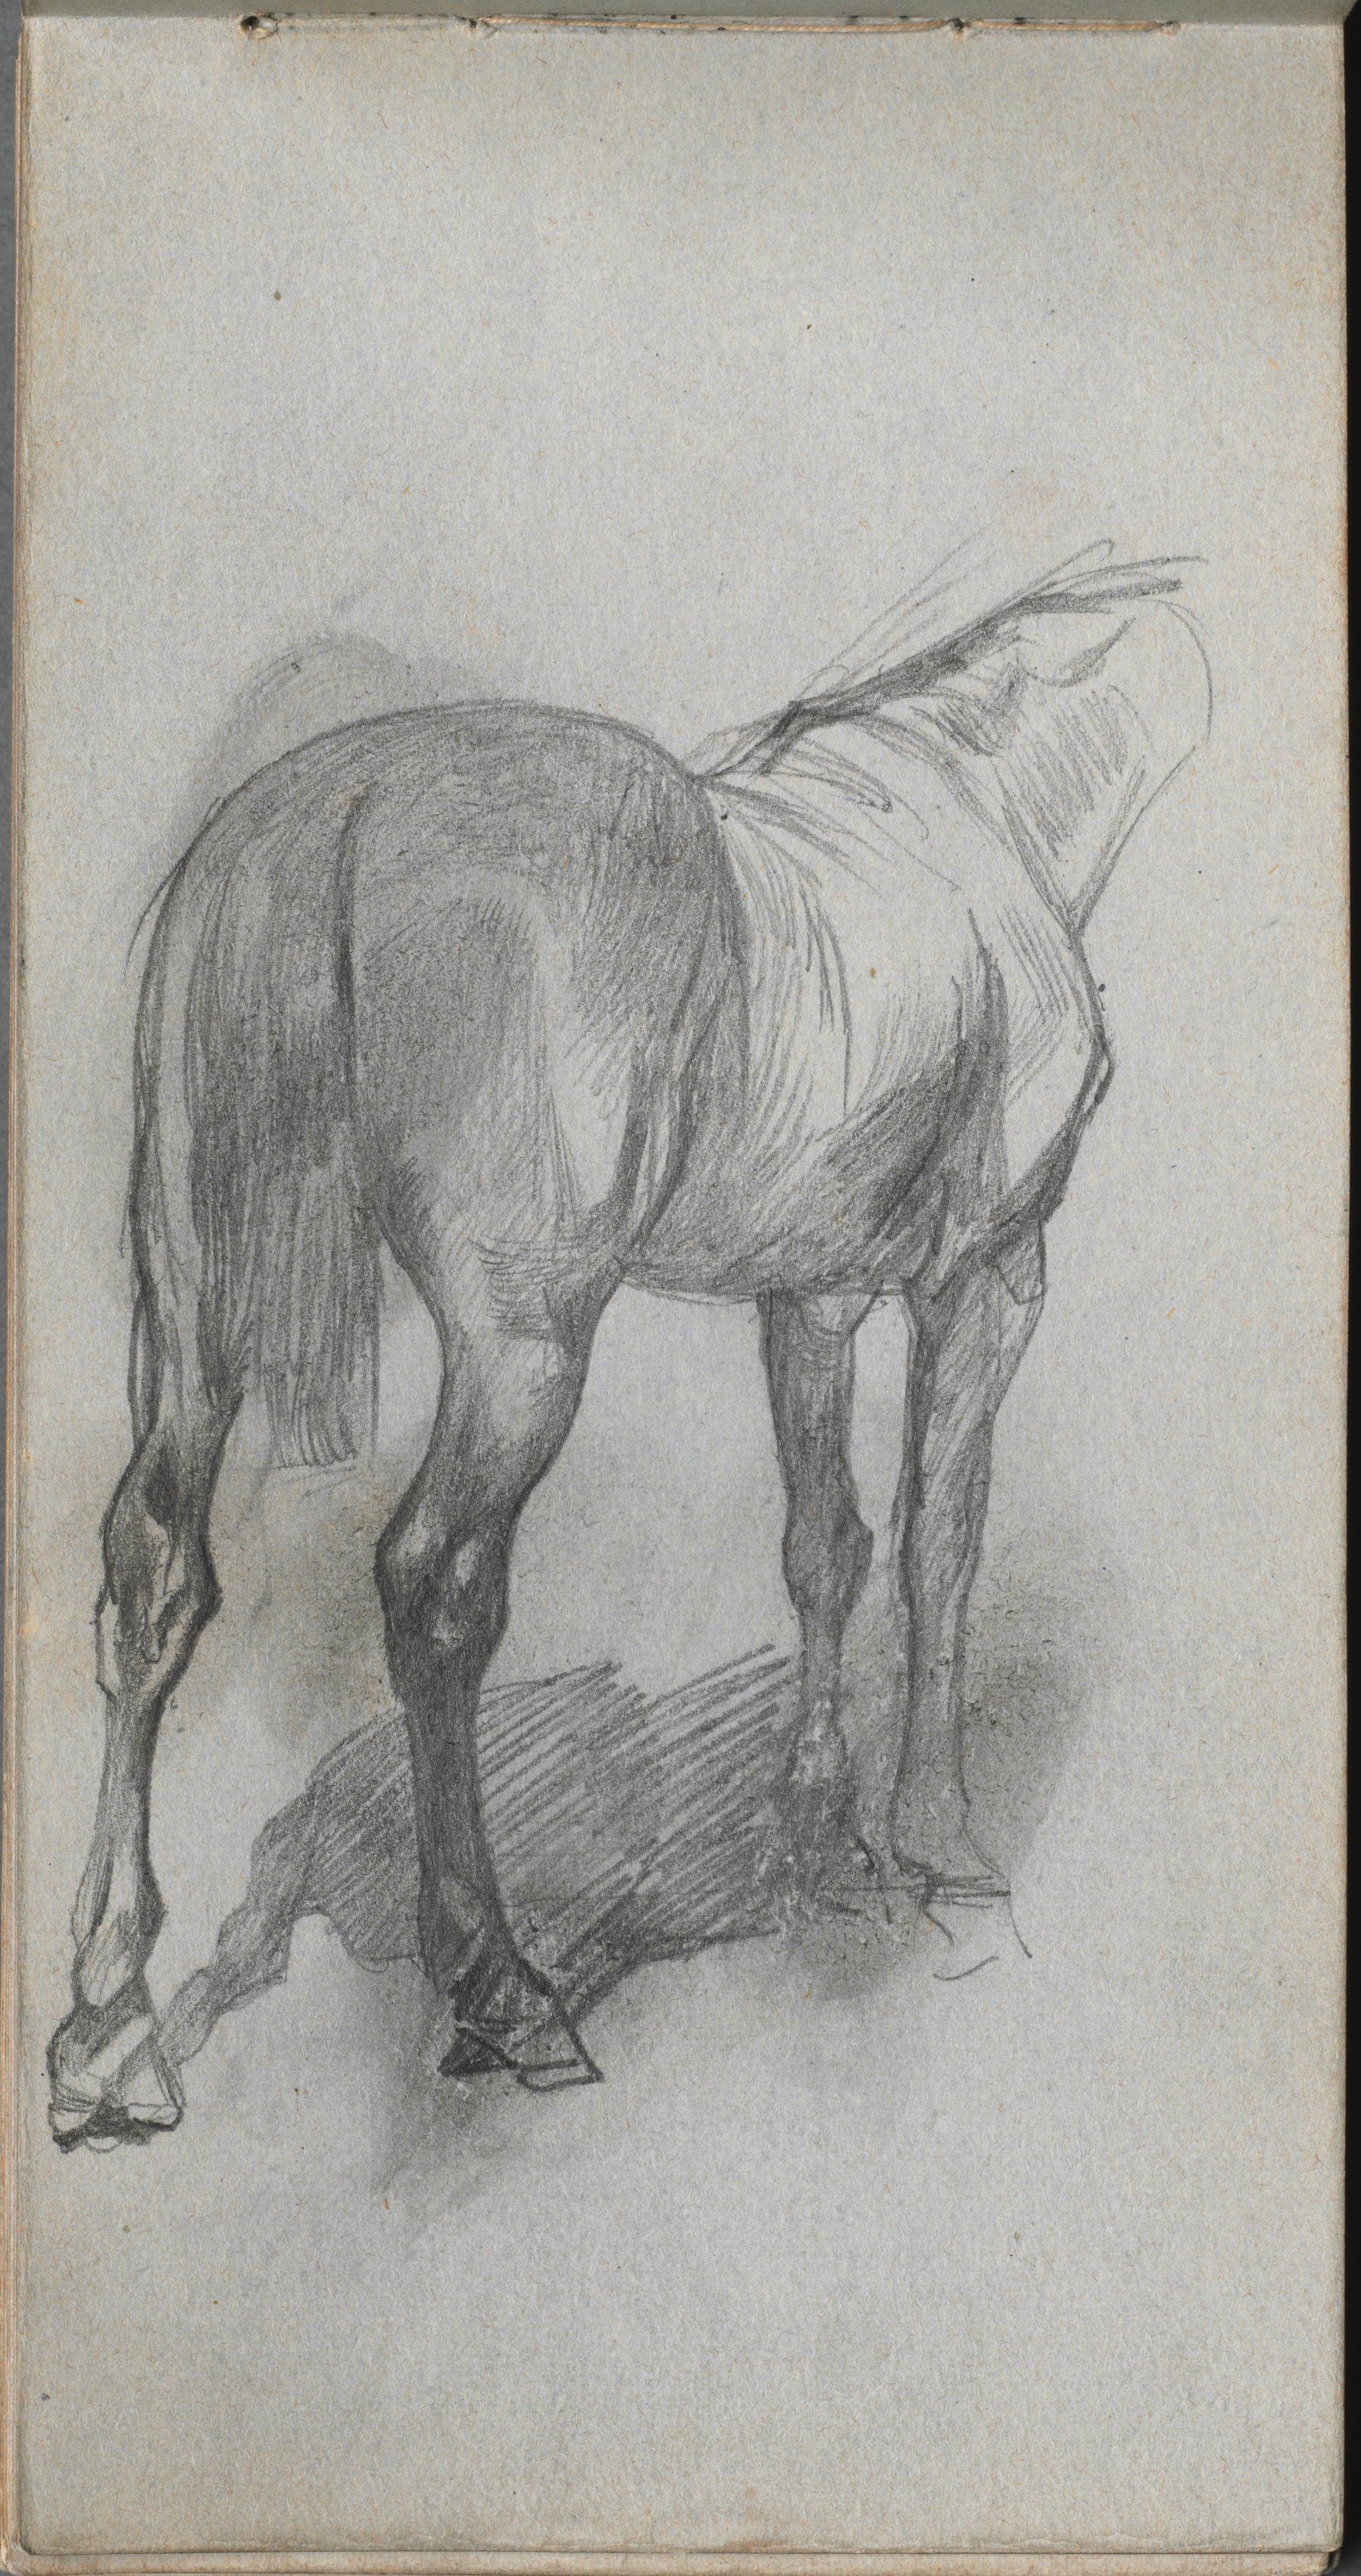 Sketchbook, page 76: Study of a Horse